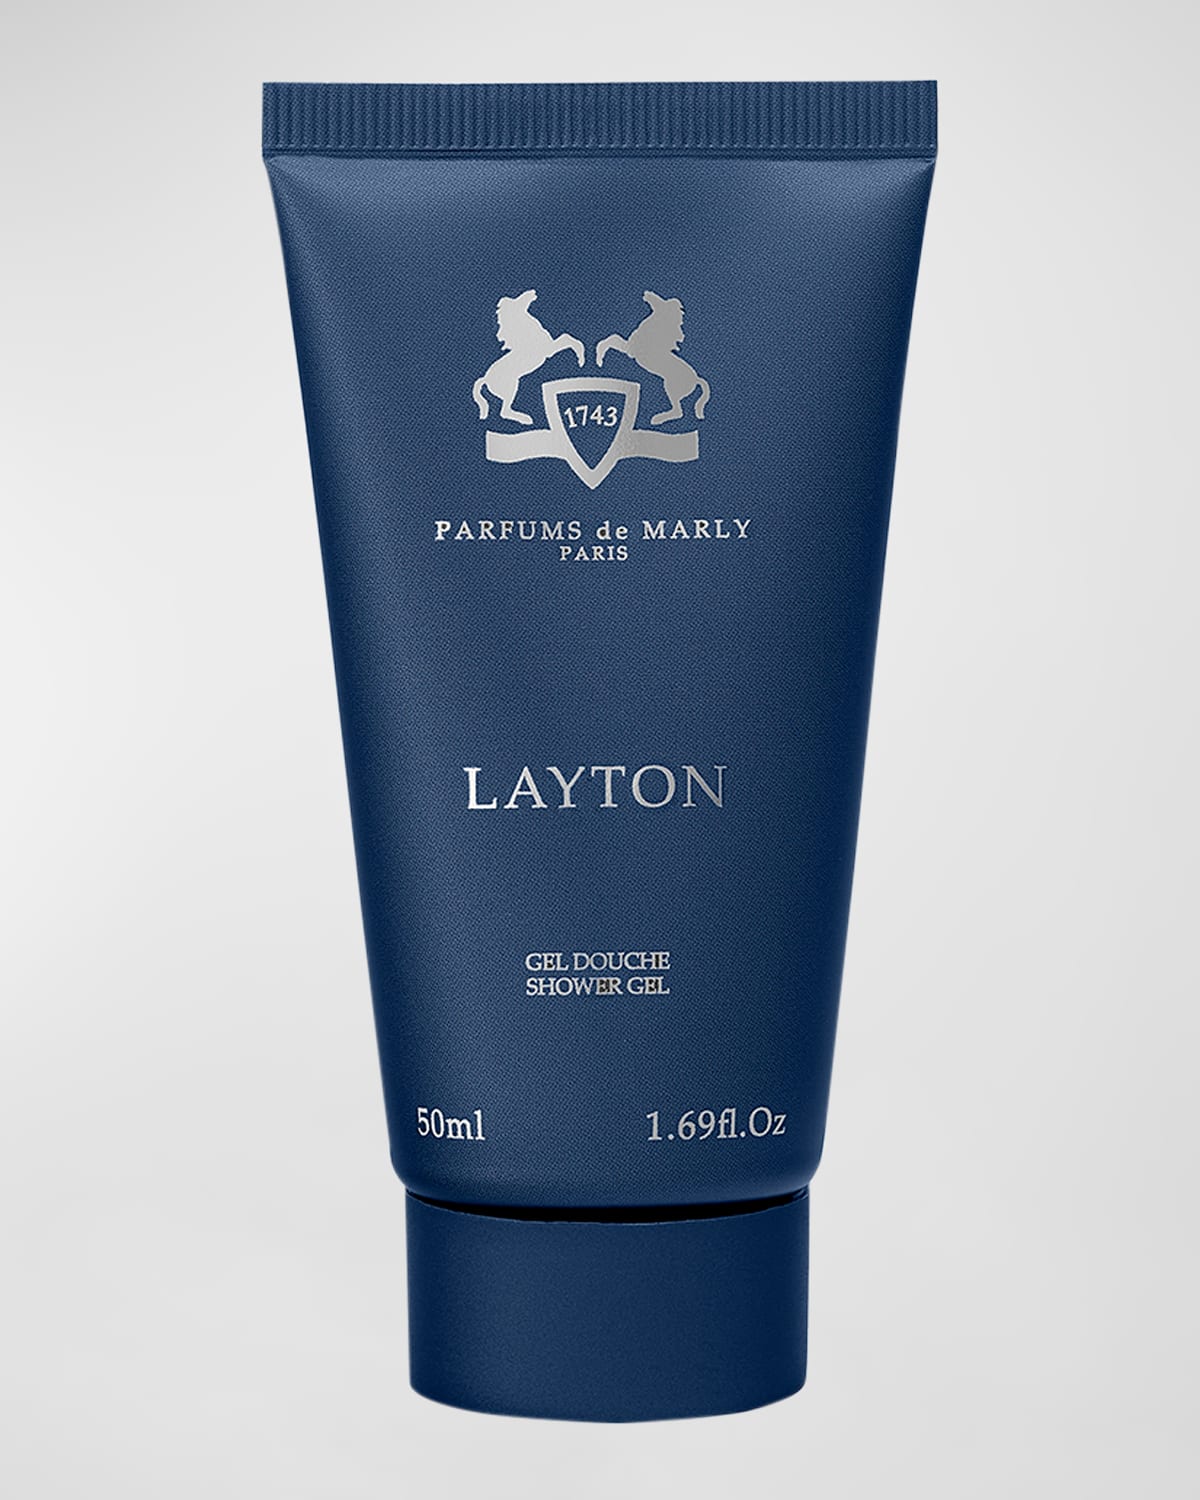 Layton Shower Gel, 1.7 oz. - Yours with any $320 Parfums de Marly Purchase